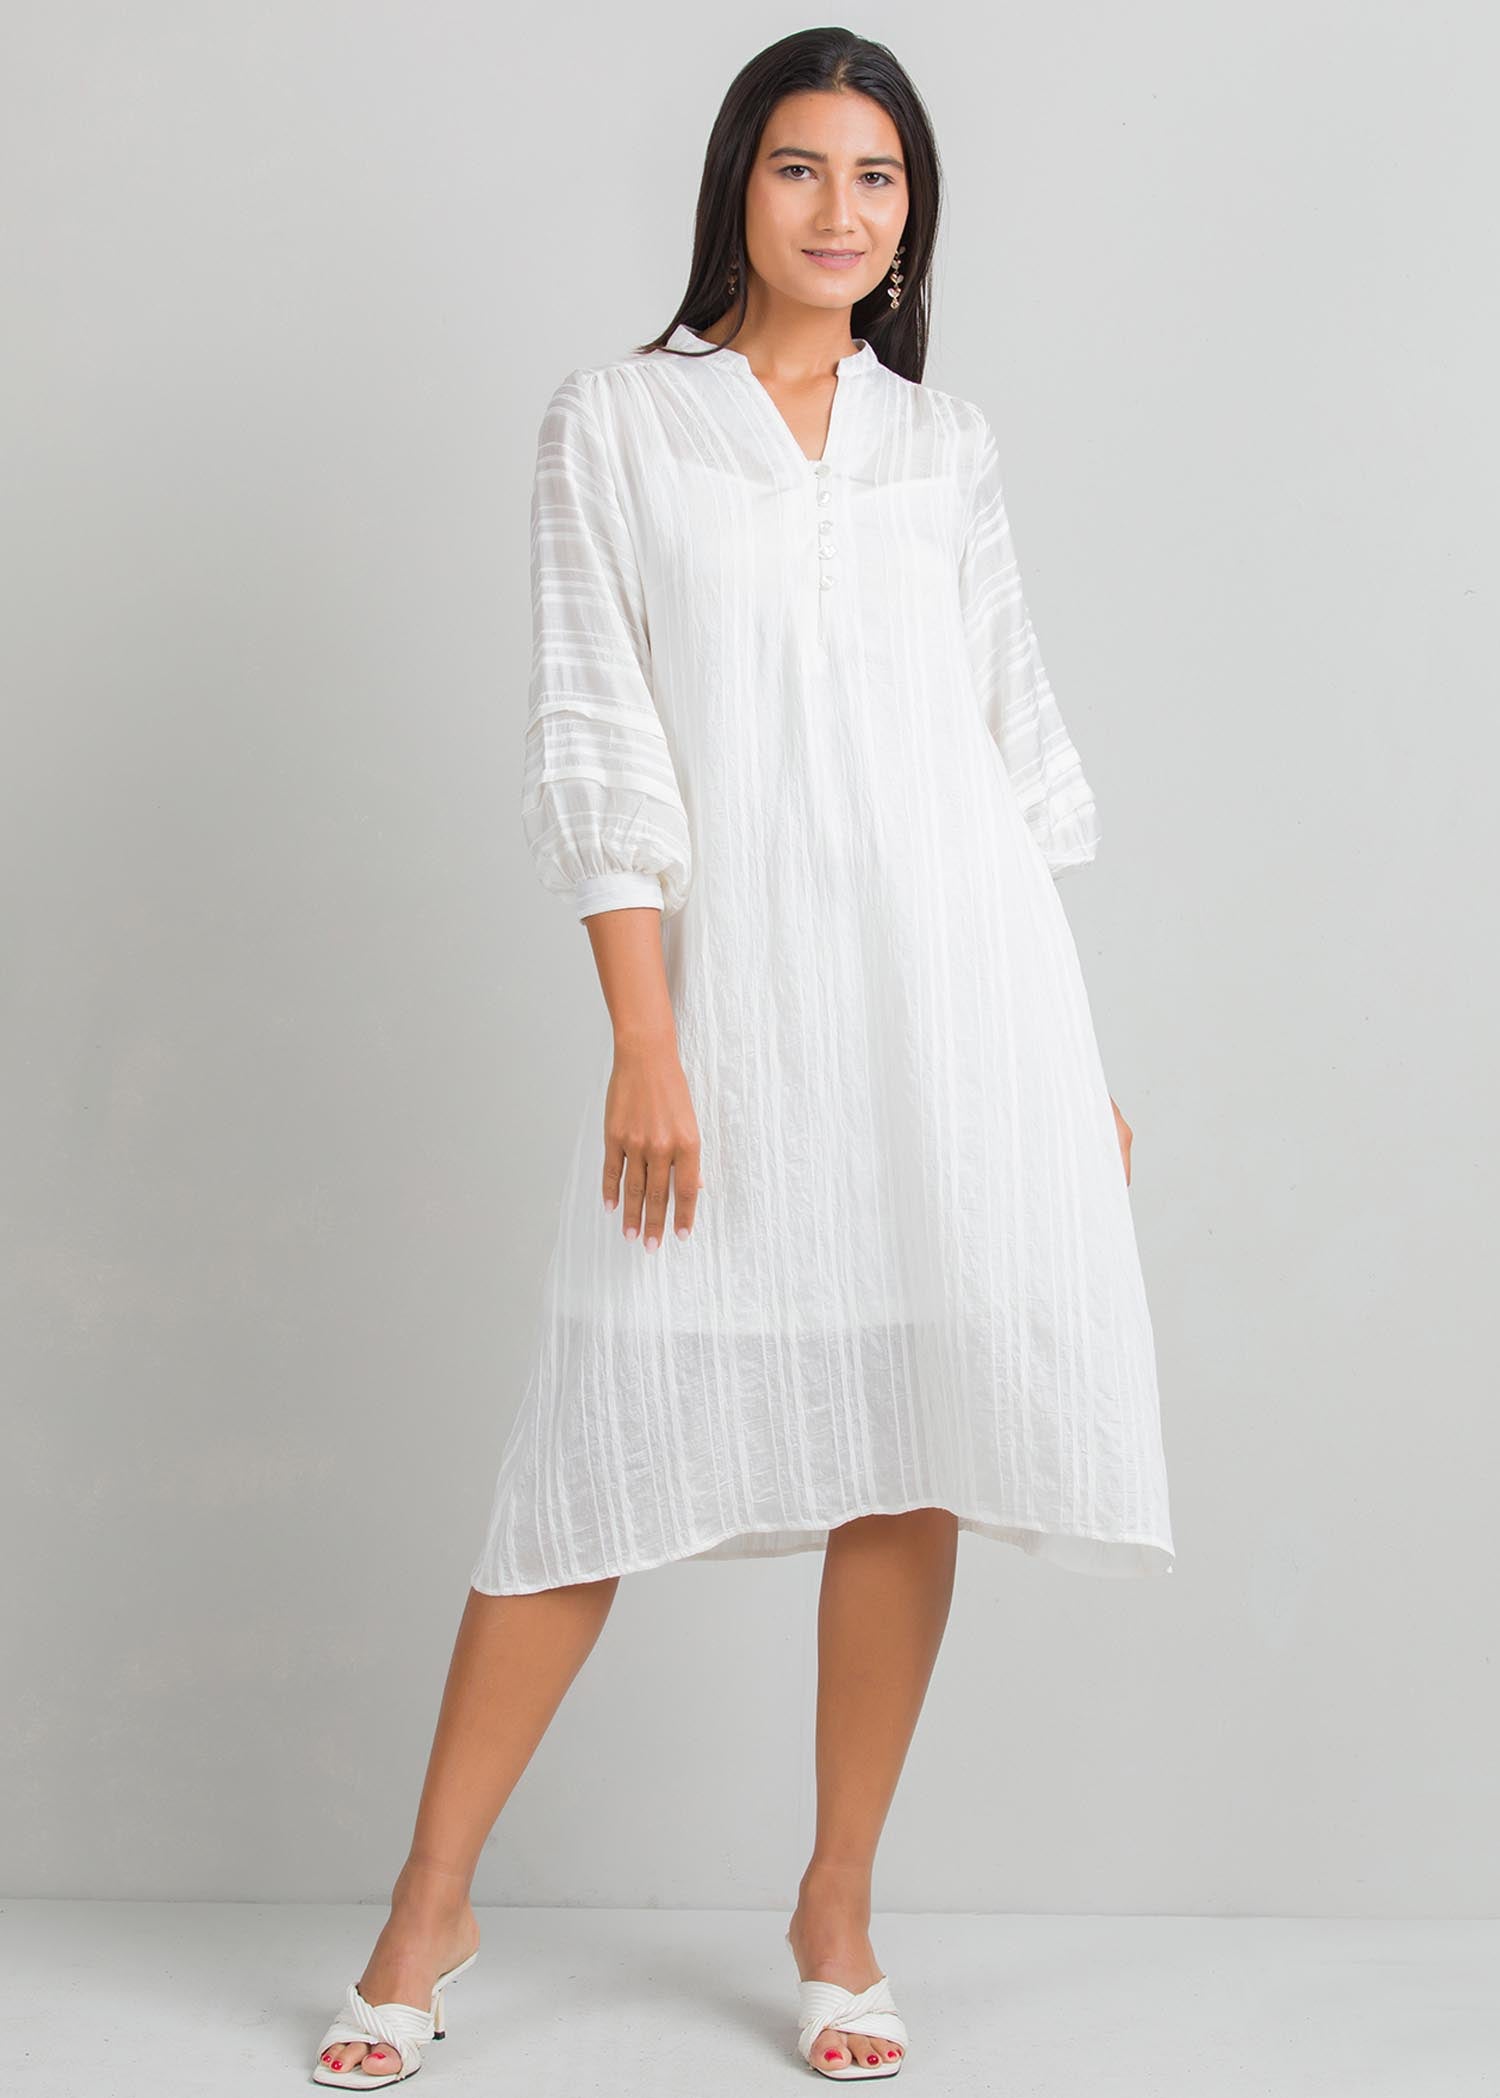 Shift dress with pin tucks on sleeves